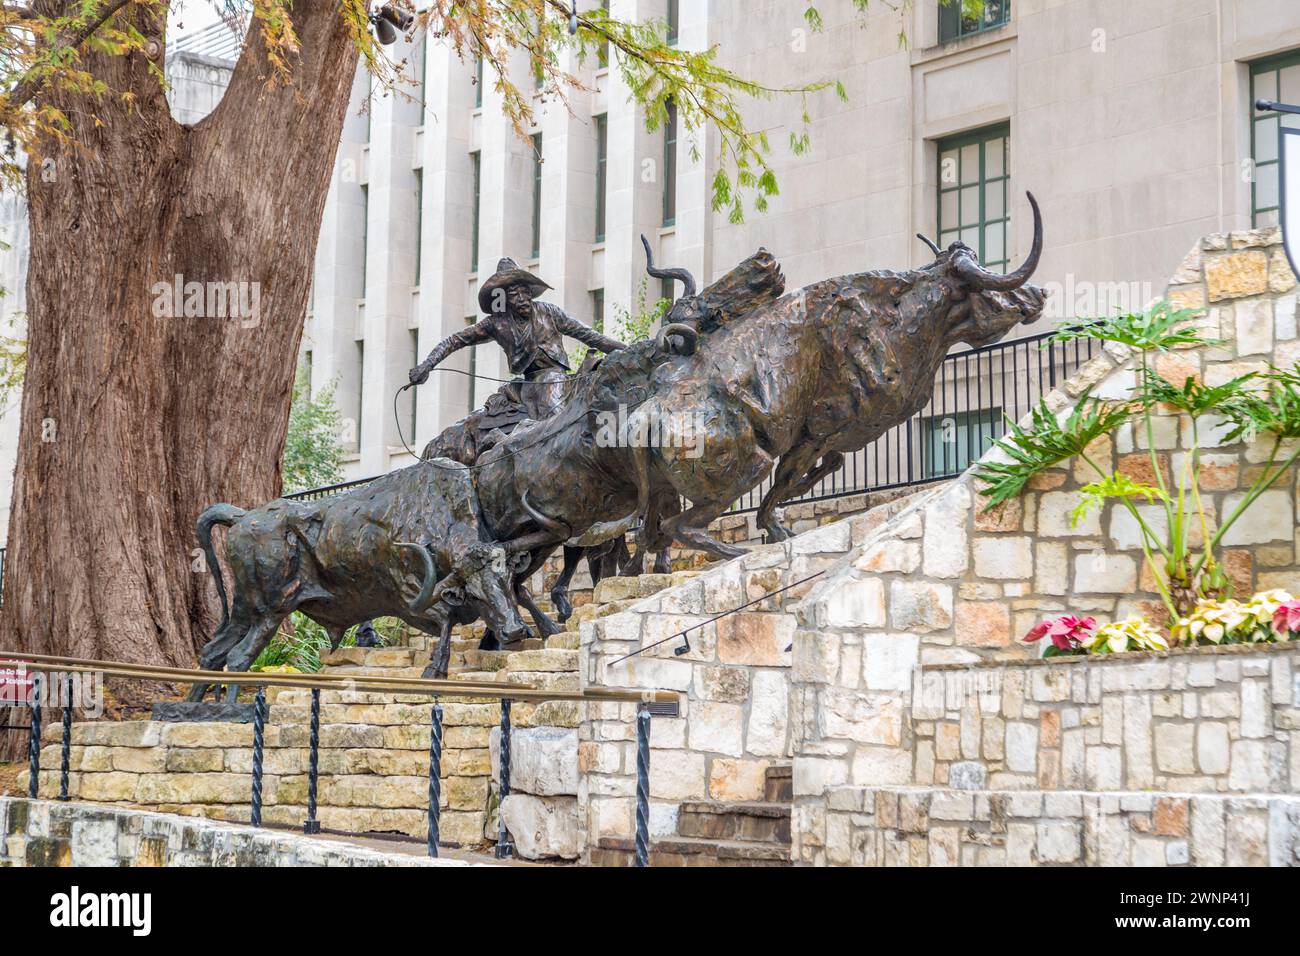 'Coming Home to the Briscoe' sculpture by artist T.D. Kelsey at the Briscoe Western Art Museum on the River Walk in downtown San Antonio, Texas Stock Photo